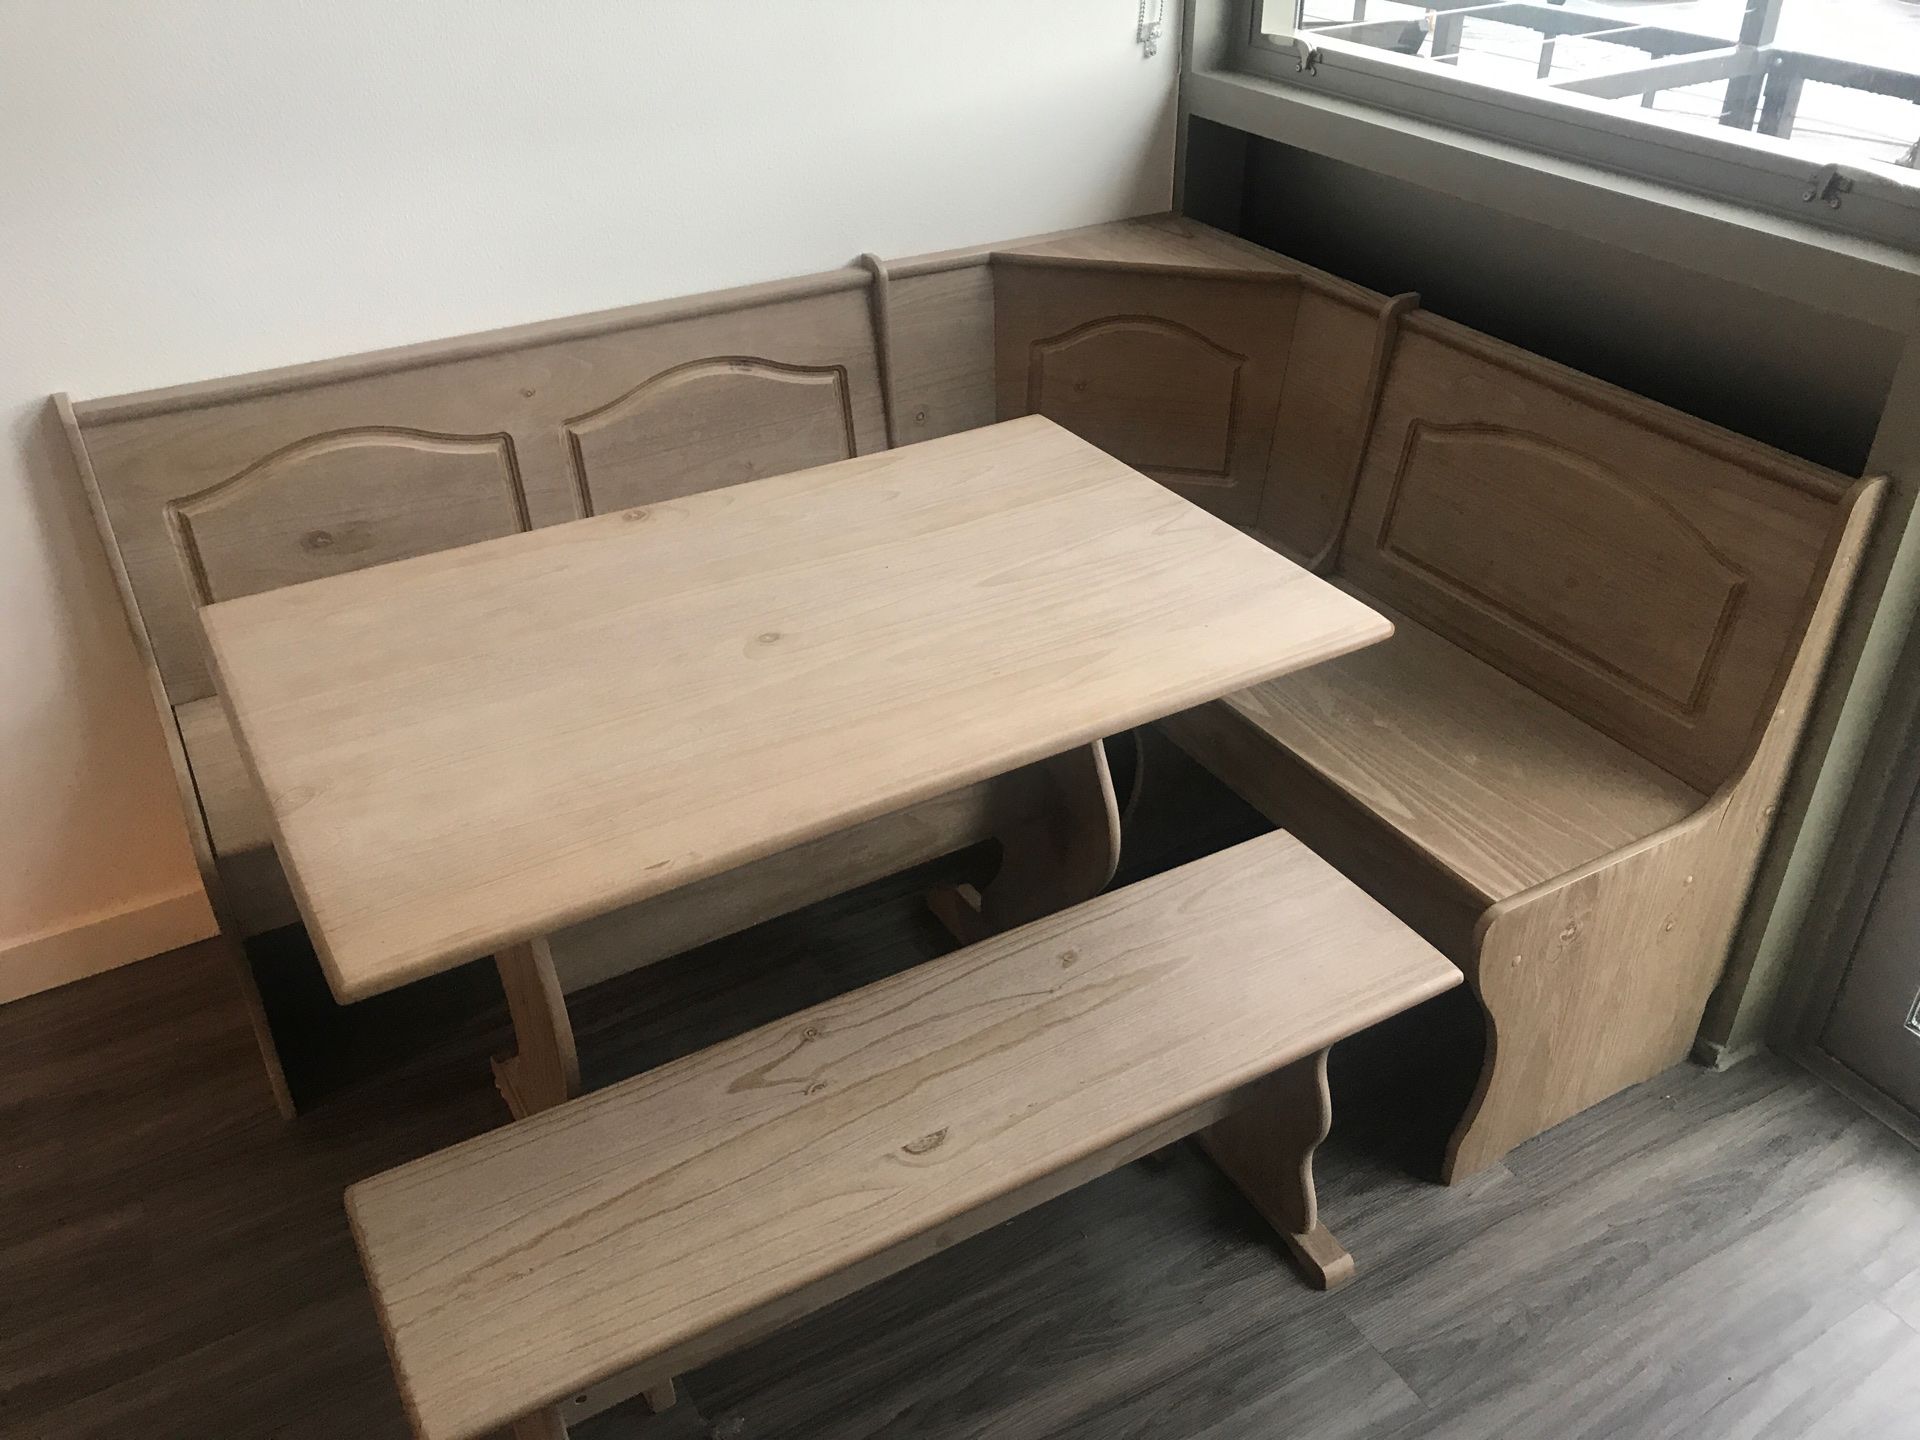 FREE wood grain kitchen nook style table, must be picked up by end of day today in Bothell